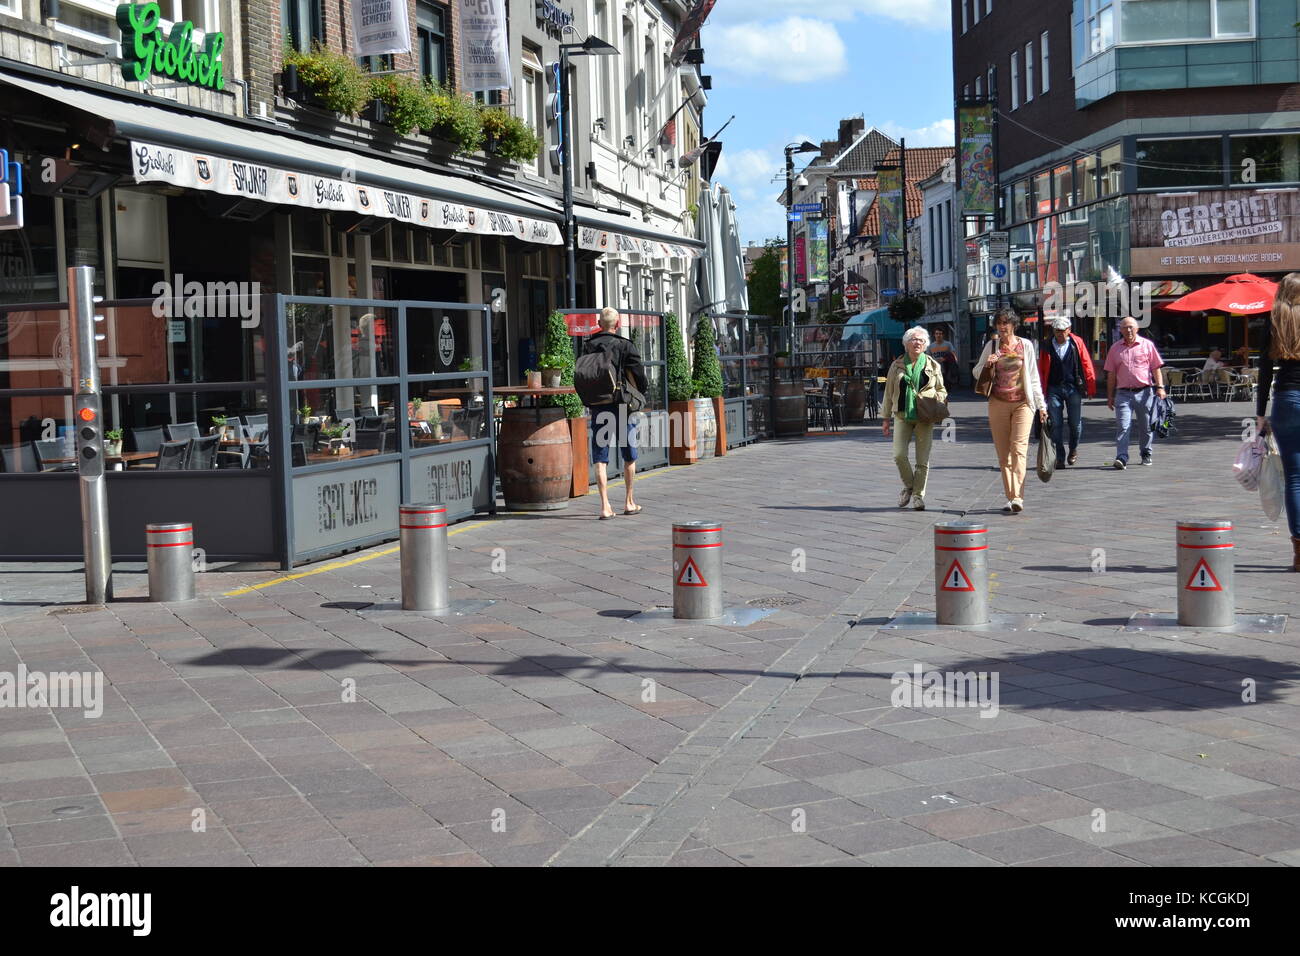 Smart City Eindhoven. Pedestrian safety and traffic control equipment Stock Photo